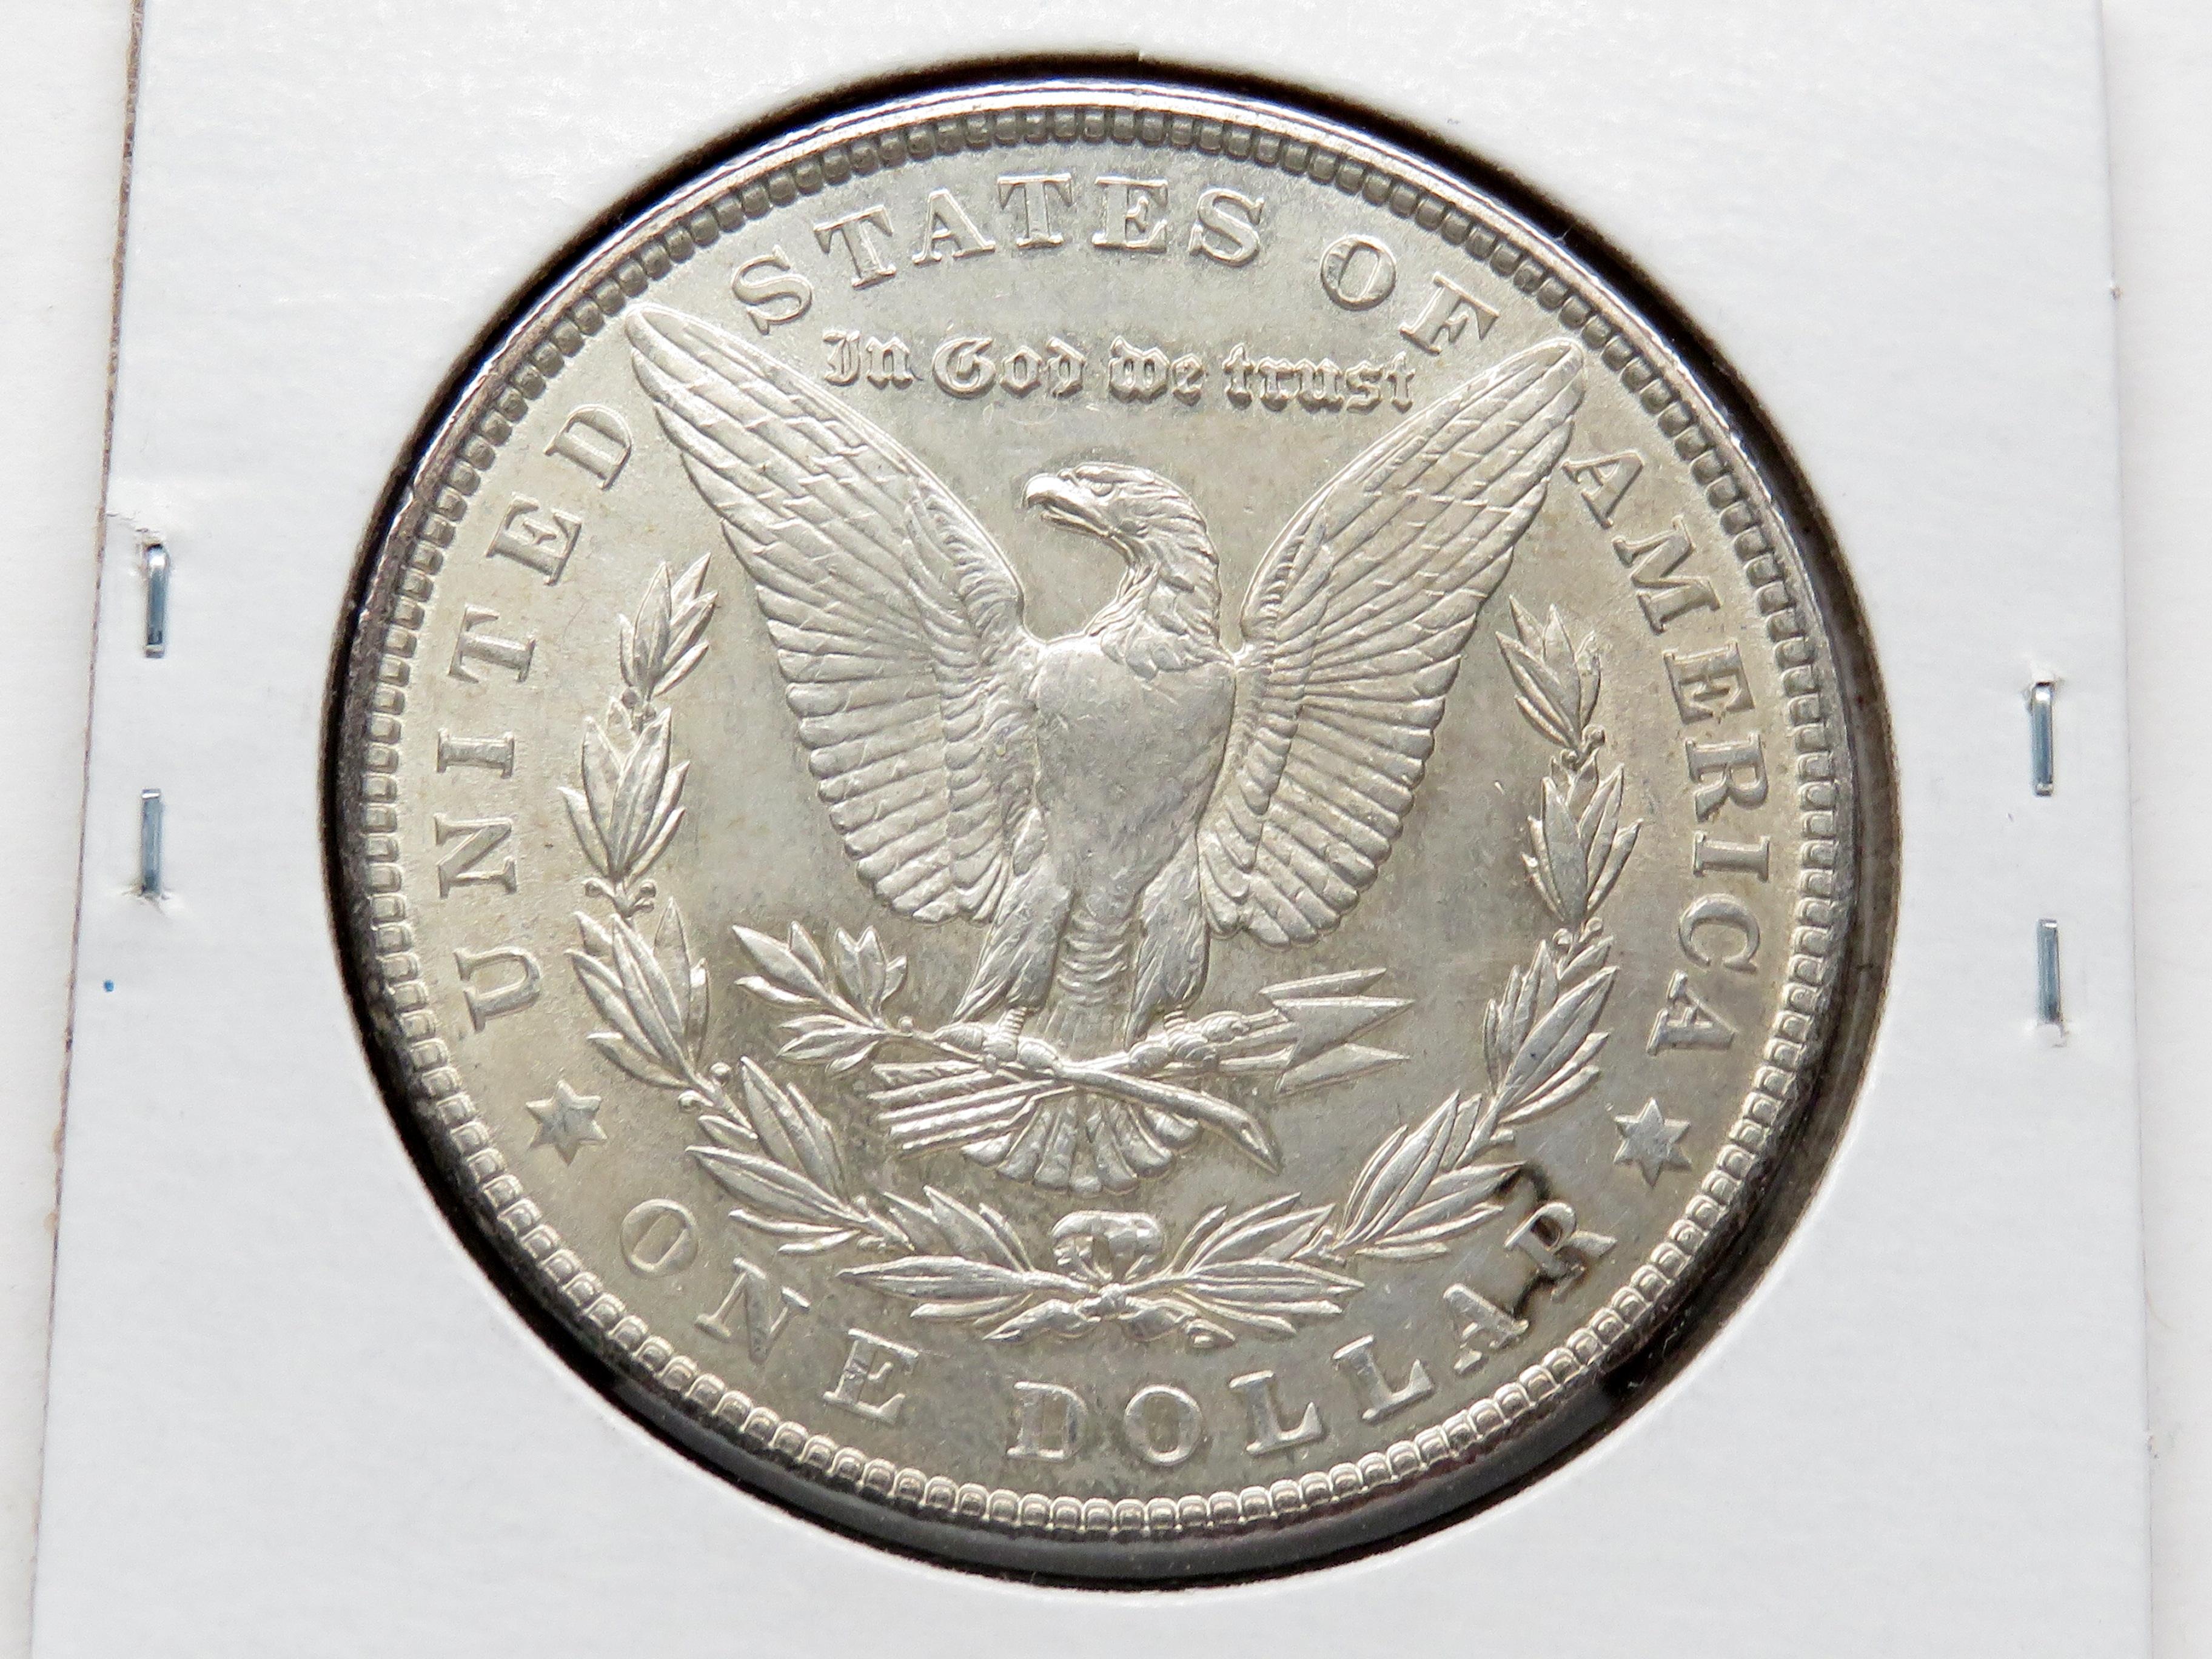 Morgan $ 1902 CH EF lightly toned better date